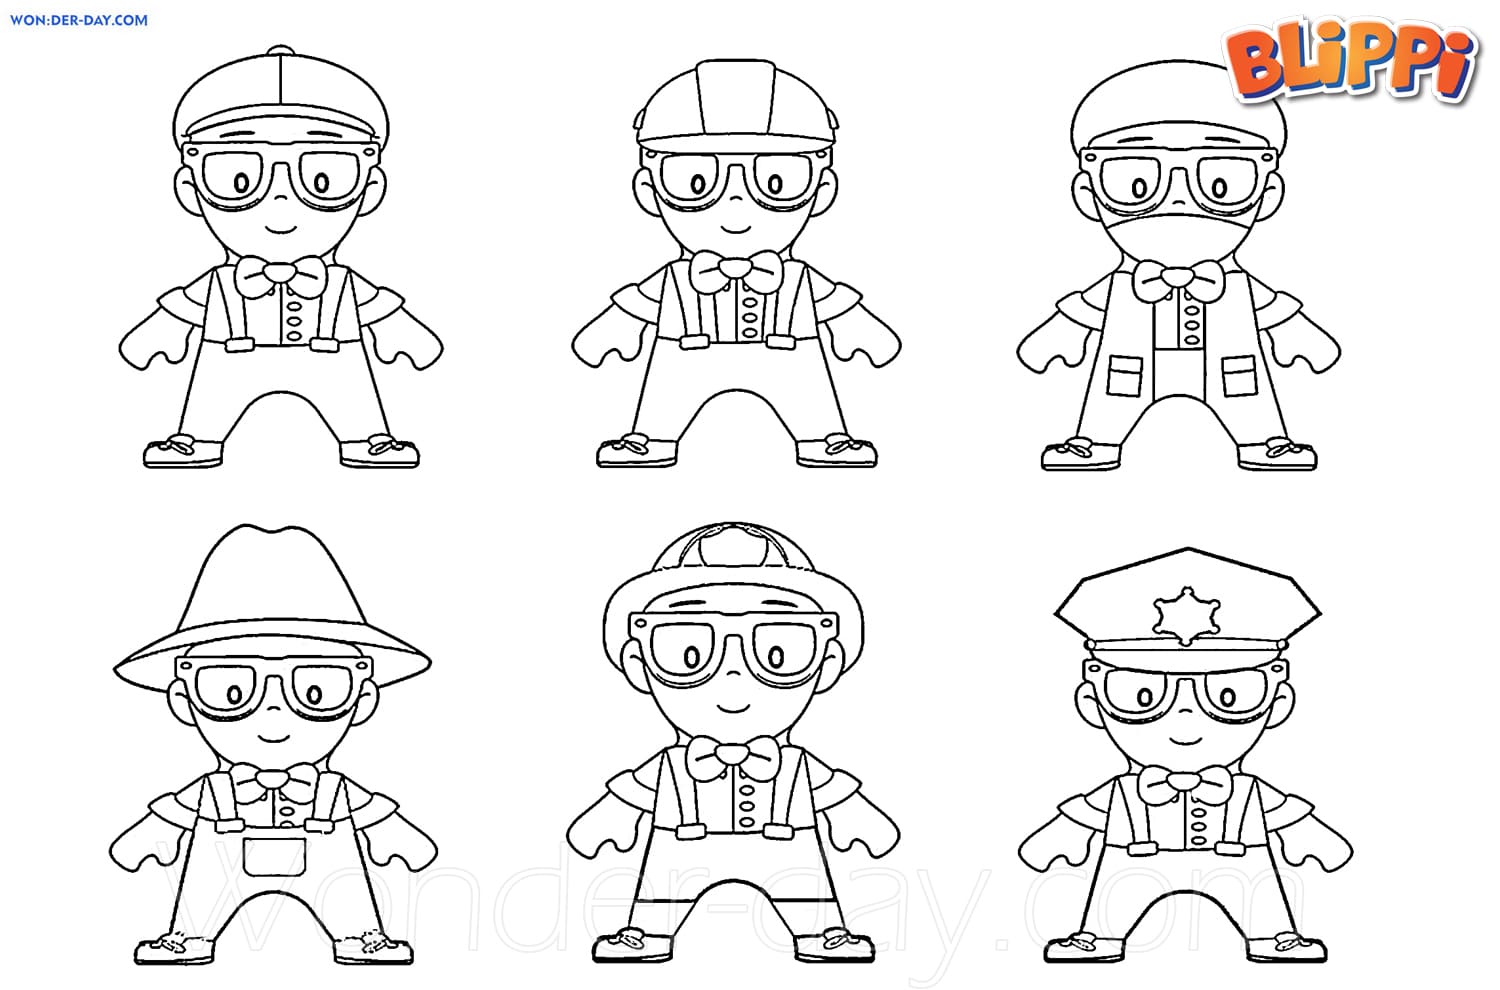 Free printable blippi coloring pages for kids wonder day â coloring pages for children and adults